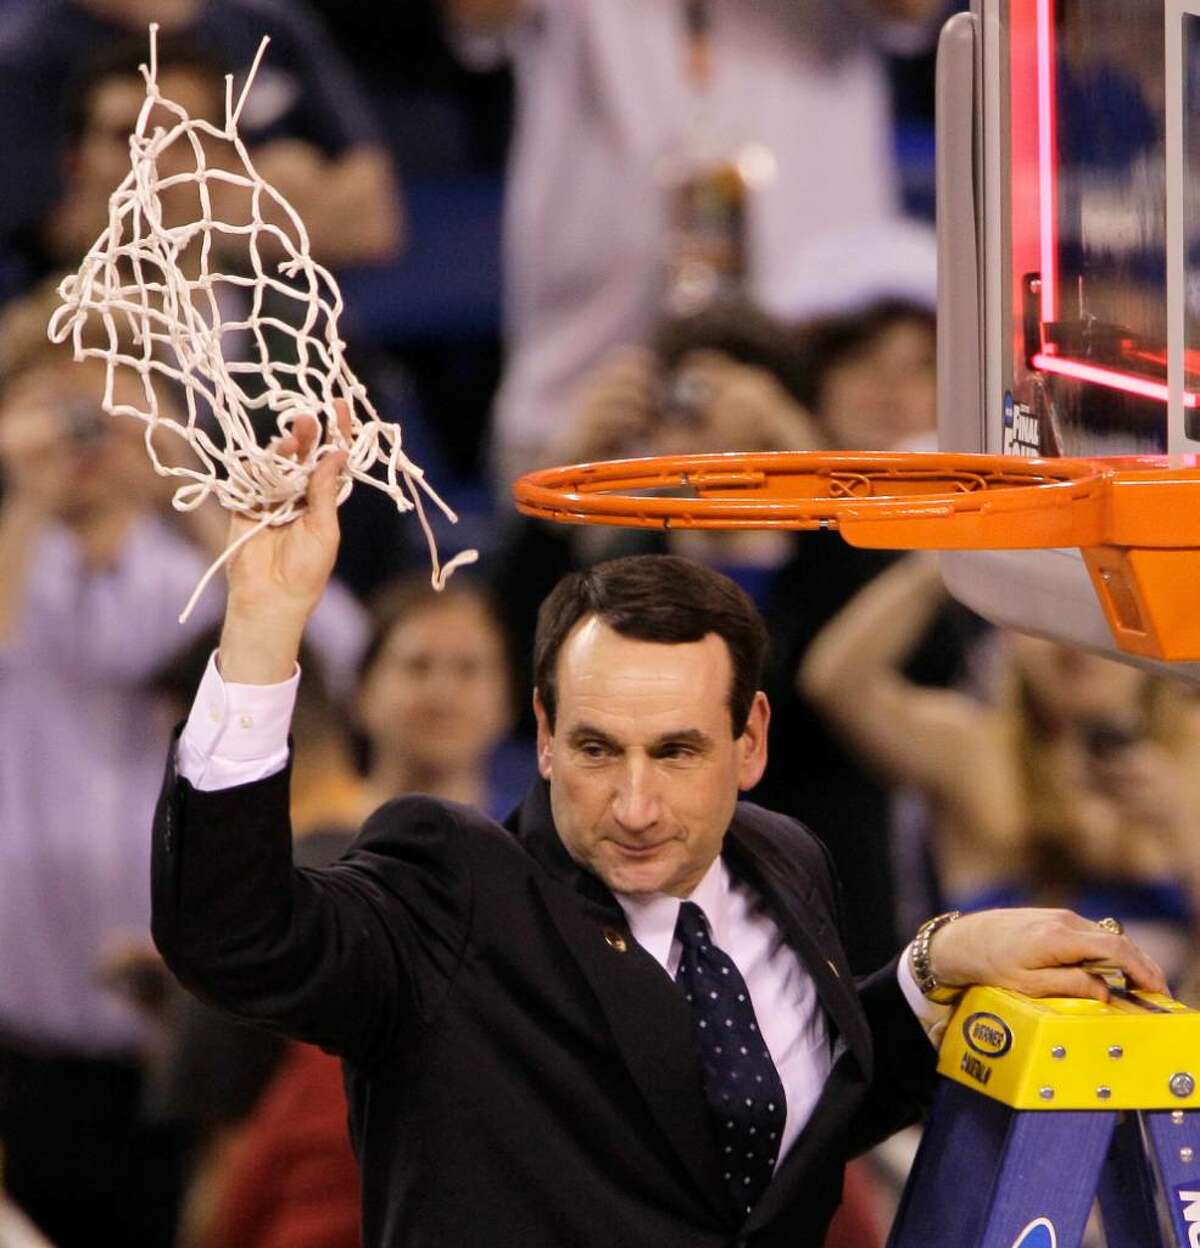 Duke head coach Mike Krzyzewski cuts down the net after Duke's 61-59 win over Butler in the men's NCAA Final Four college basketball championship game Monday, April 5, 2010, in Indianapolis.